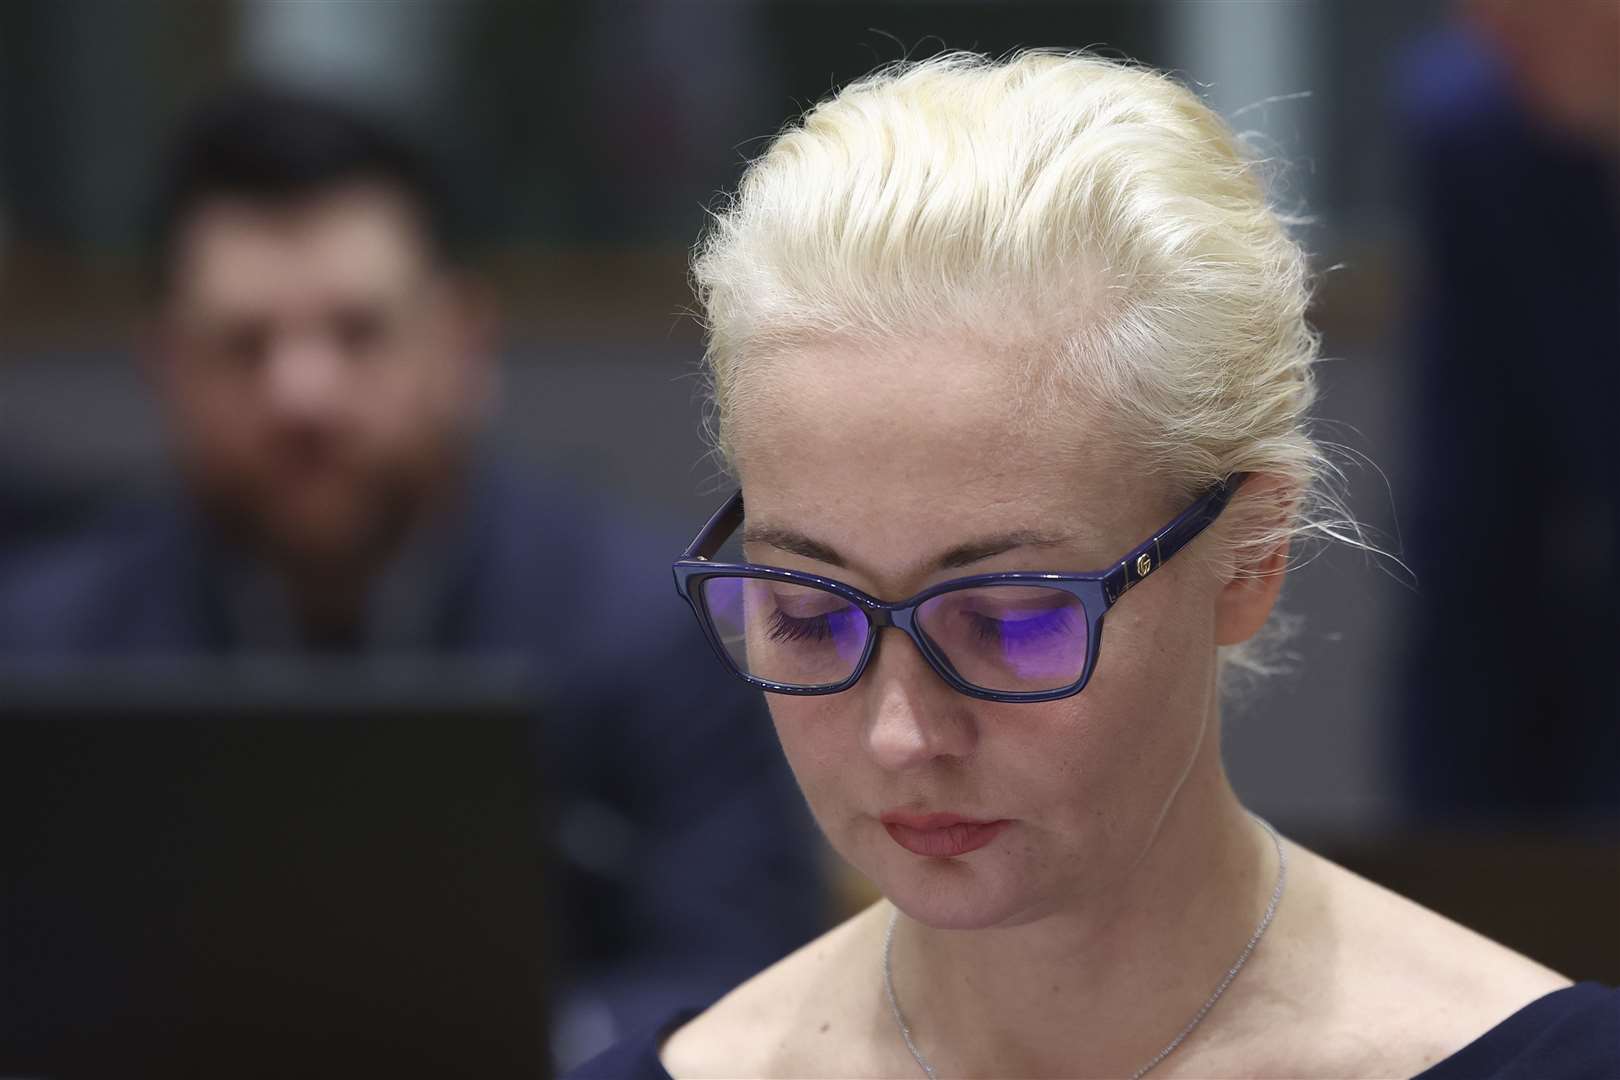 Yulia Navalnaya, wife of Russian opposition leader Alexei Navalny, joins a meeting of EU foreign ministers at the European Council building in Brussels (Yves Herman, Pool Photo via AP)